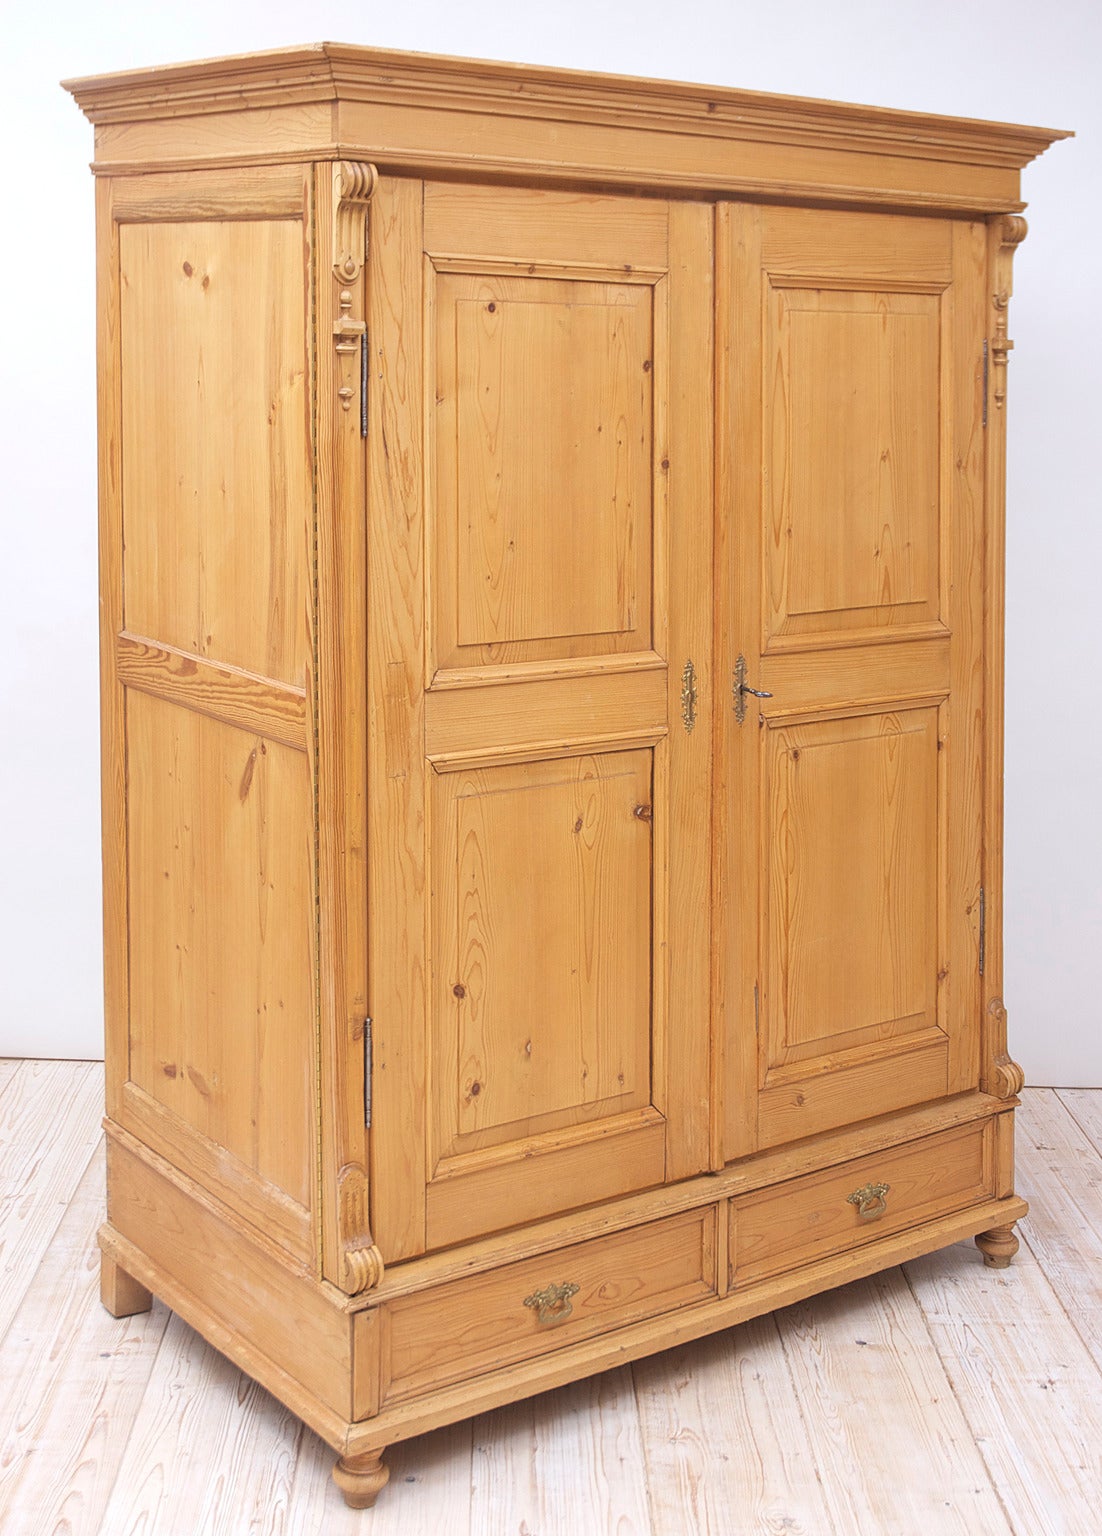 An unusually deep armoire in pine with paneled doors and sides. Features a second set of hinges that allow doors to open fully and hug the sides, Germany, circa 1880. Offers lots of storage potential!

Note: There are two lower drawer faces only.